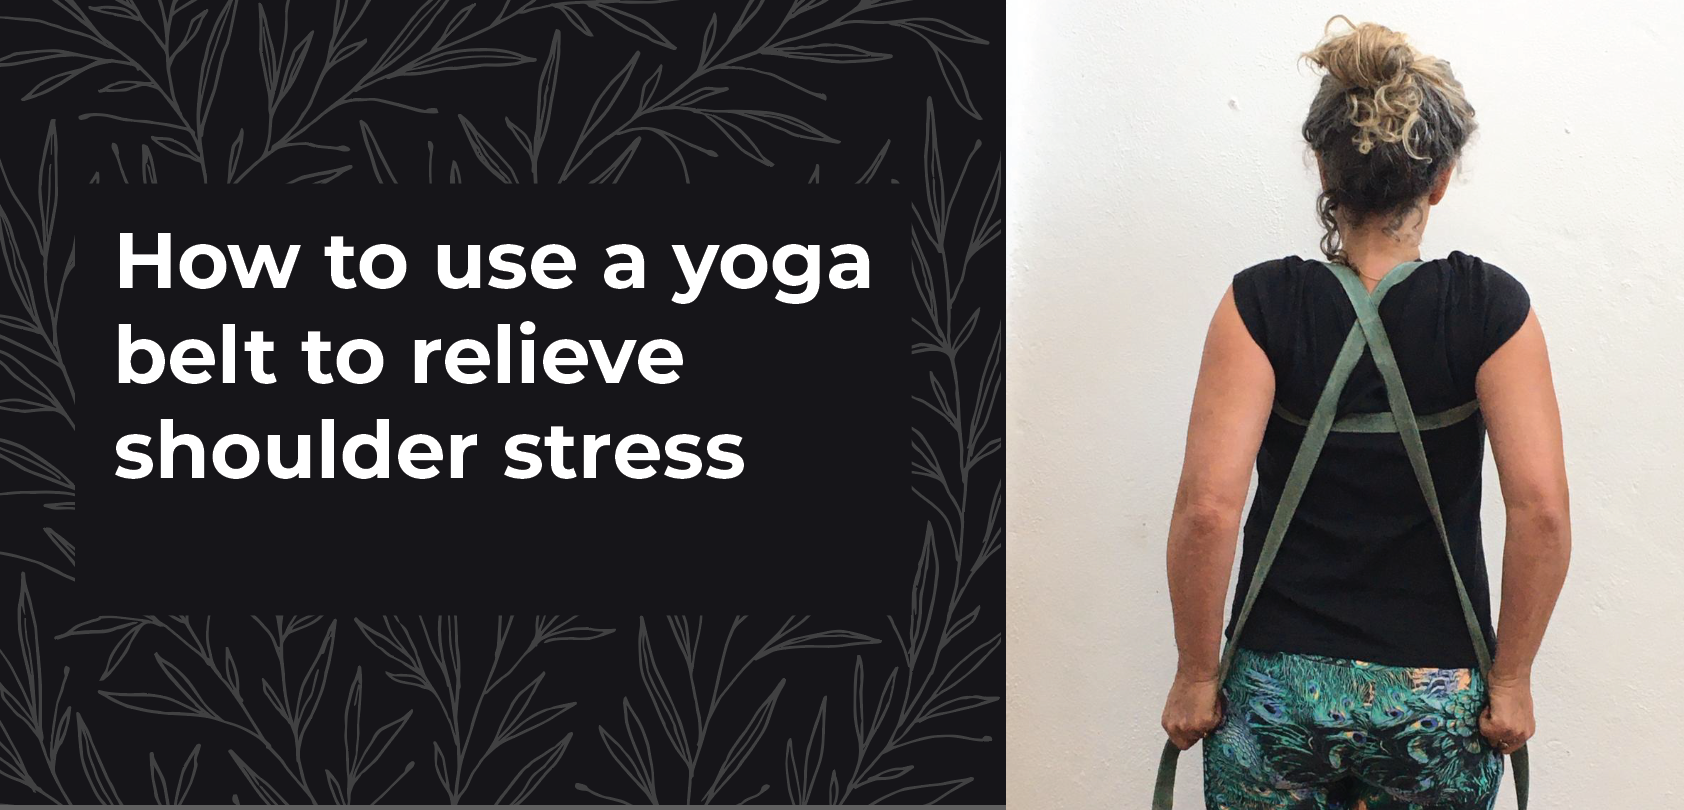 How to use the yoga belt in 5 simple steps